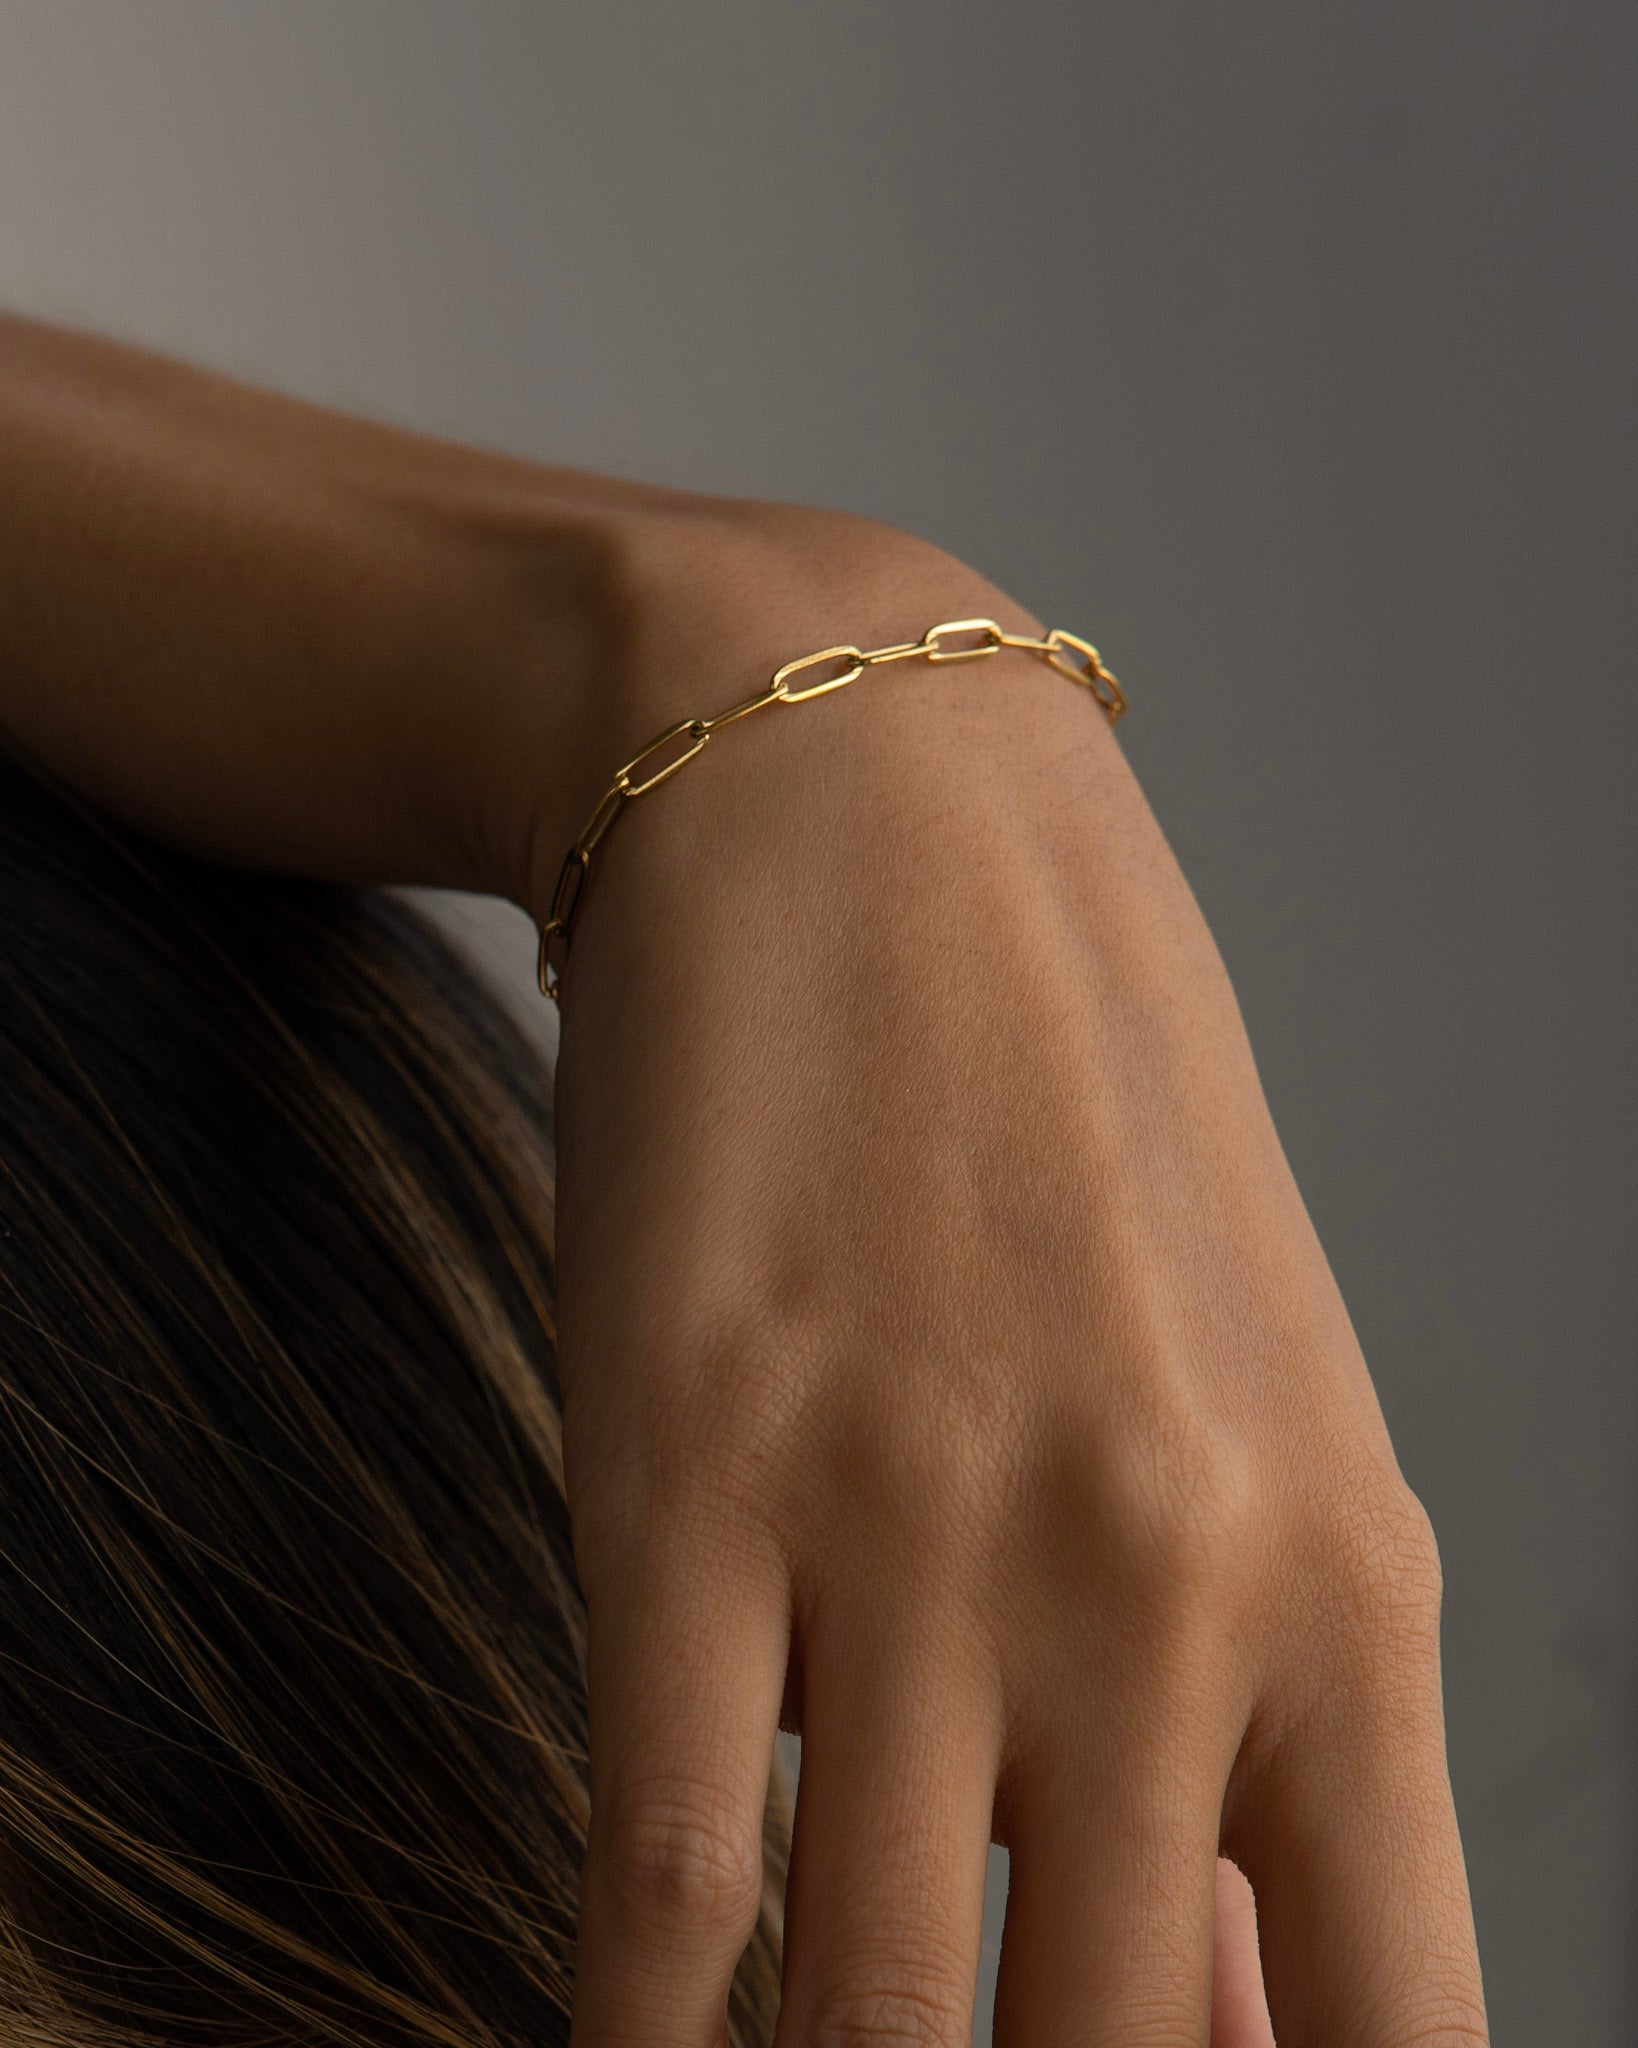 Maritsa women's bracelet by Five Jwlry, crafted from a 3mm paperclip chain in gold-colored, water-resistant 316L stainless steel. Available in size 16cm with a 4cm extension. Hypoallergenic with a 2-year warranty.